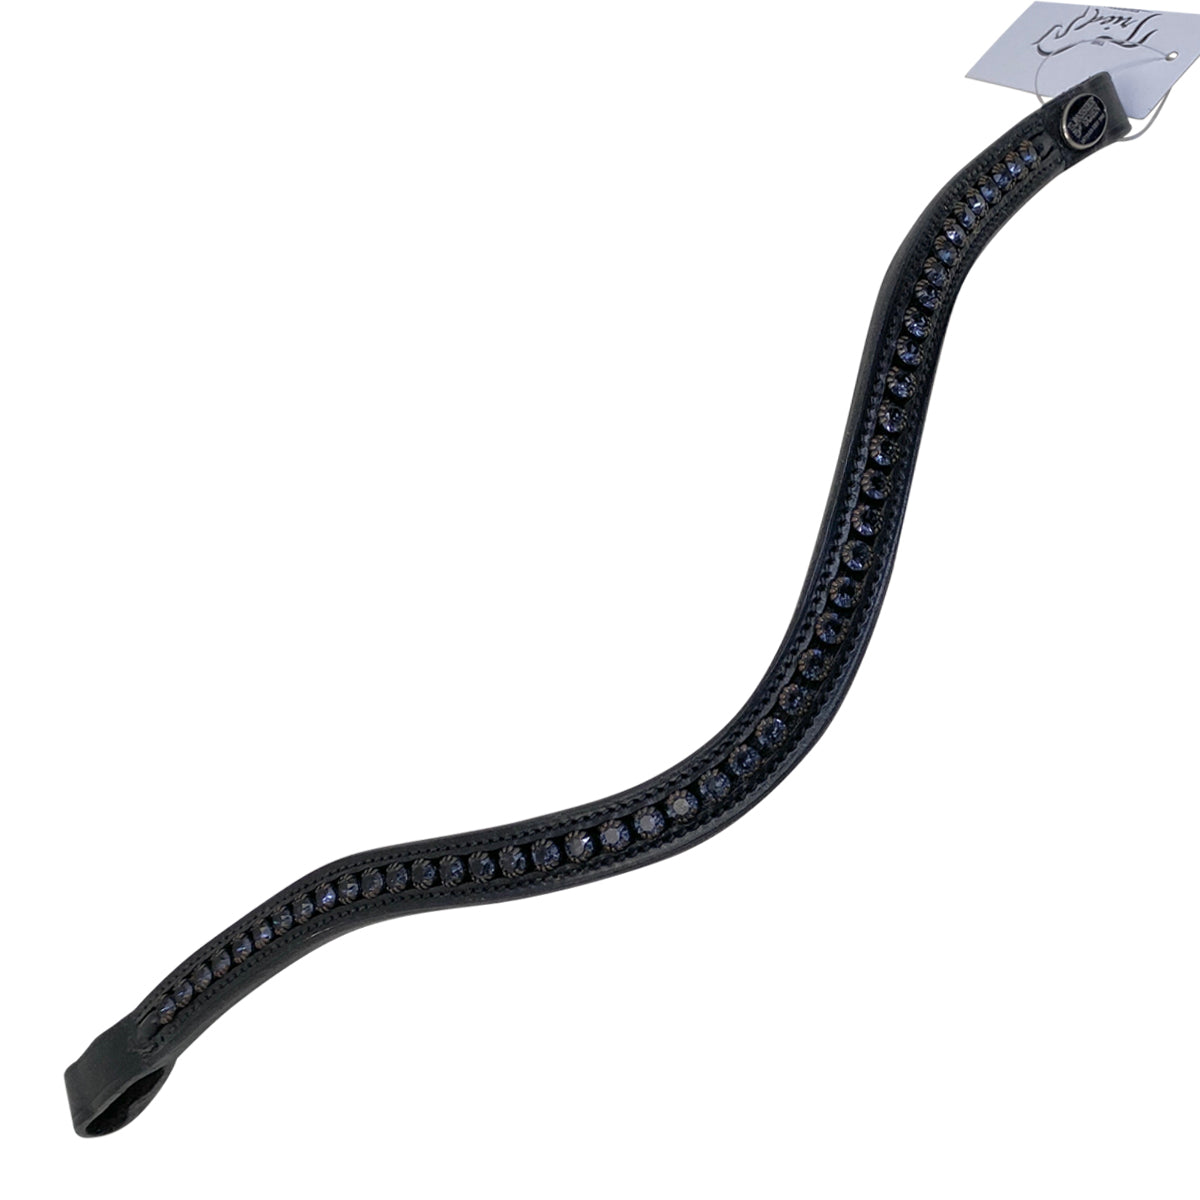 Passier Large Crystal Browband in Black w/Graphite Crystals